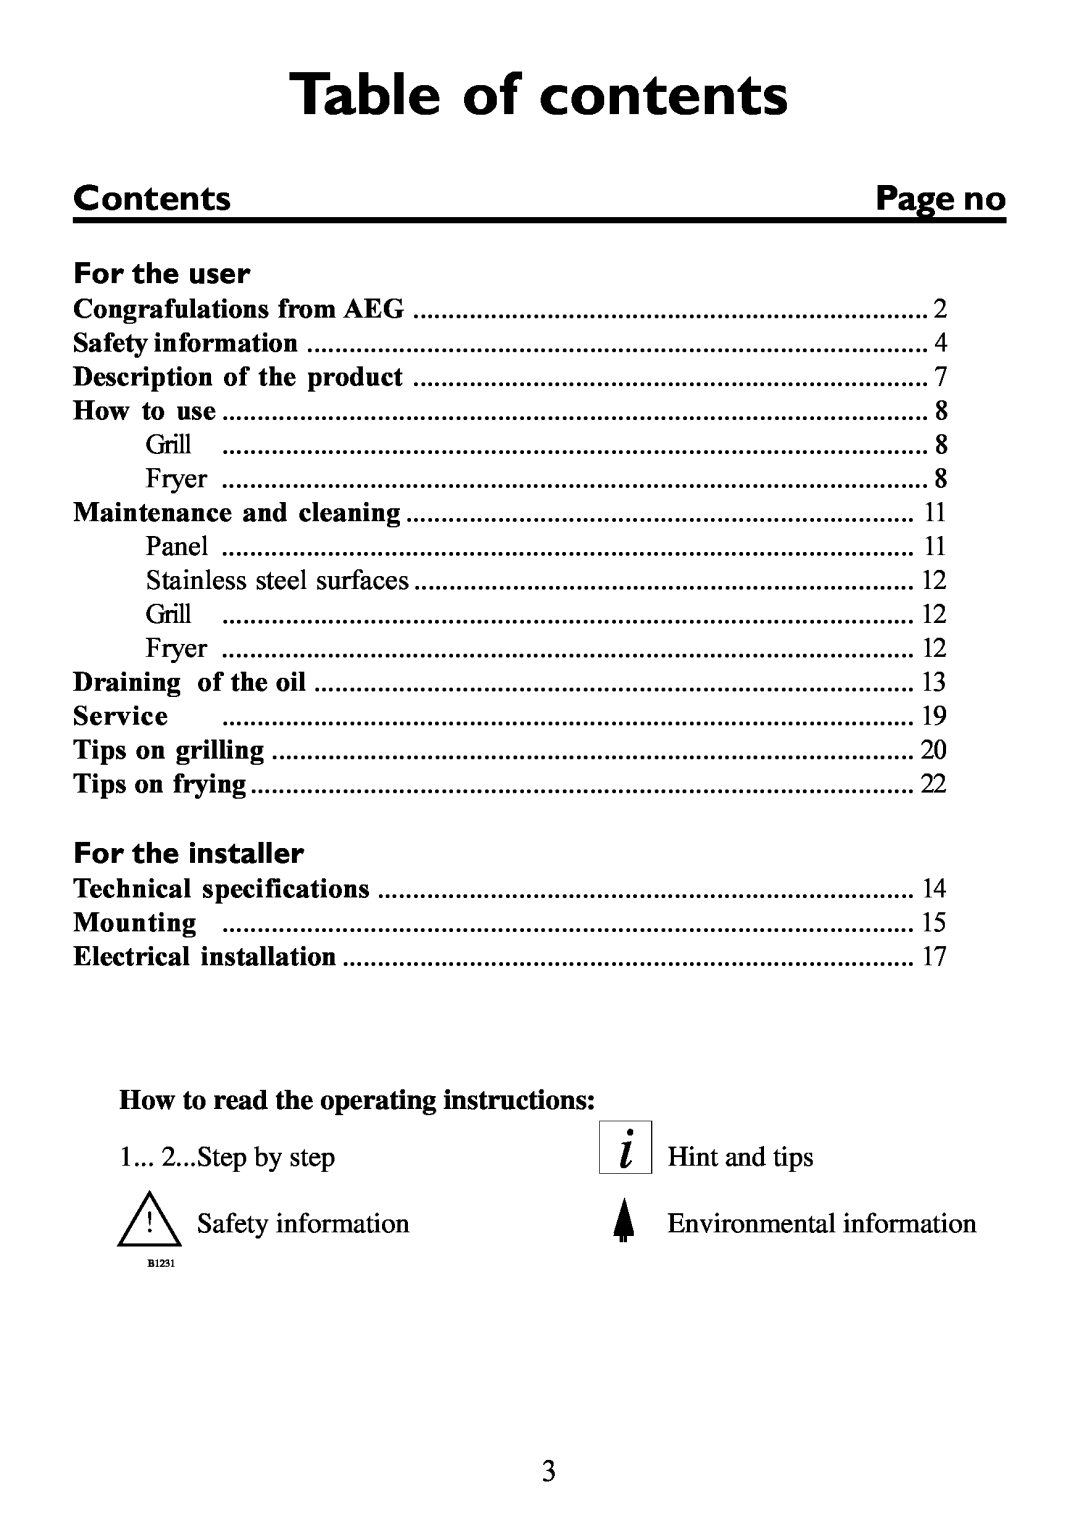 AEG 949600686 manual Table of contents, For the user, For the installer, How to read the operating instructions, Contents 